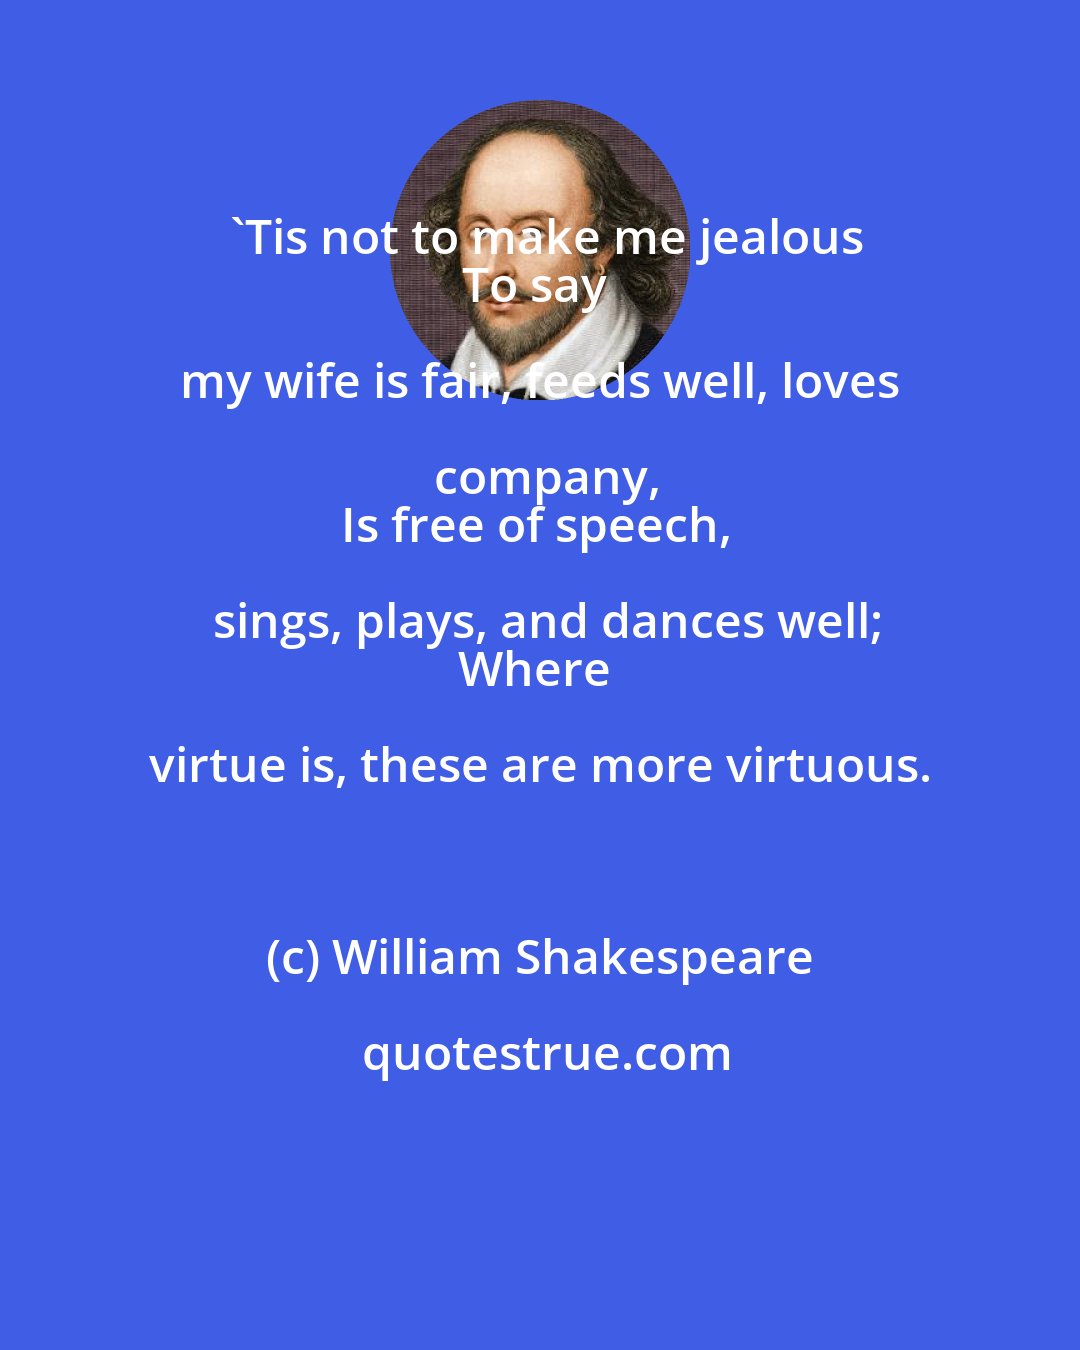 William Shakespeare: 'Tis not to make me jealous
To say my wife is fair, feeds well, loves company,
Is free of speech, sings, plays, and dances well;
Where virtue is, these are more virtuous.